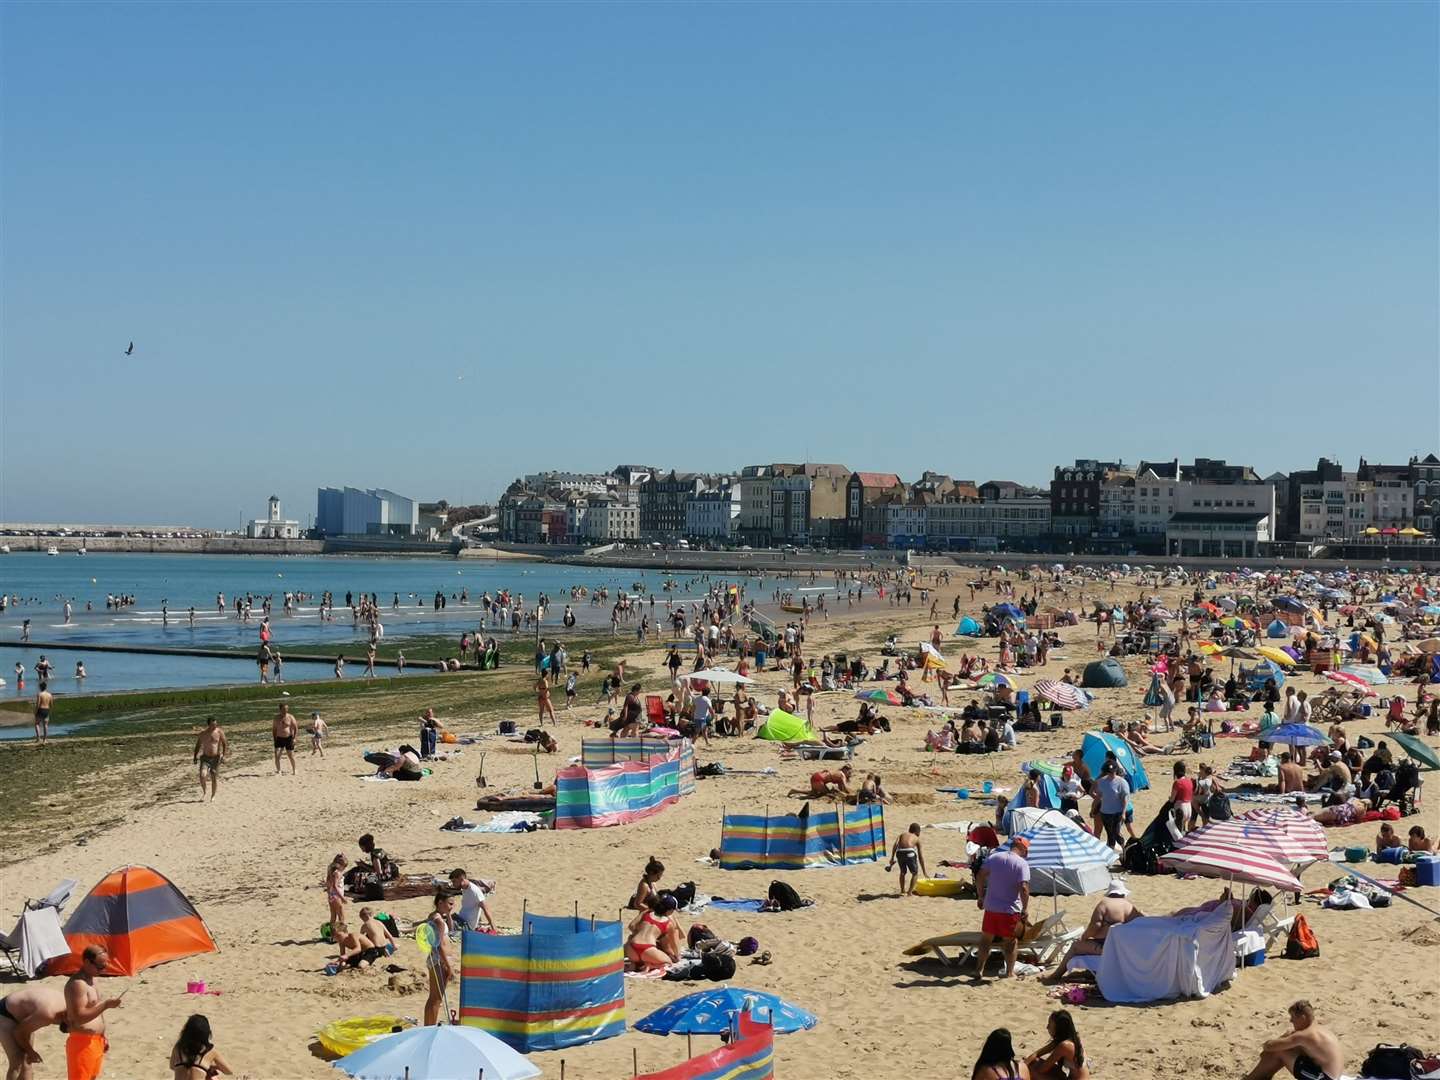 Beachgoers are slowing traffic down across the Kent coast